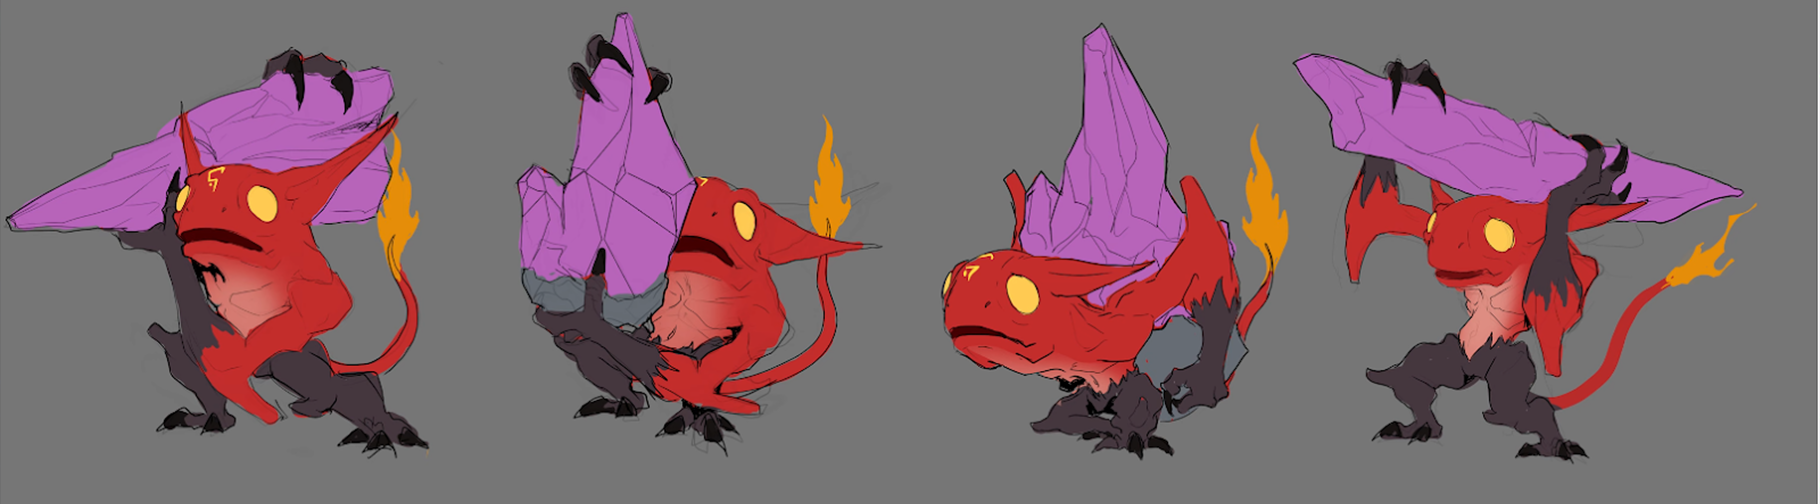 Concept art of Stormgate's Infernal Imp, featuring 4 different poses carrying a purple crystal with both hands